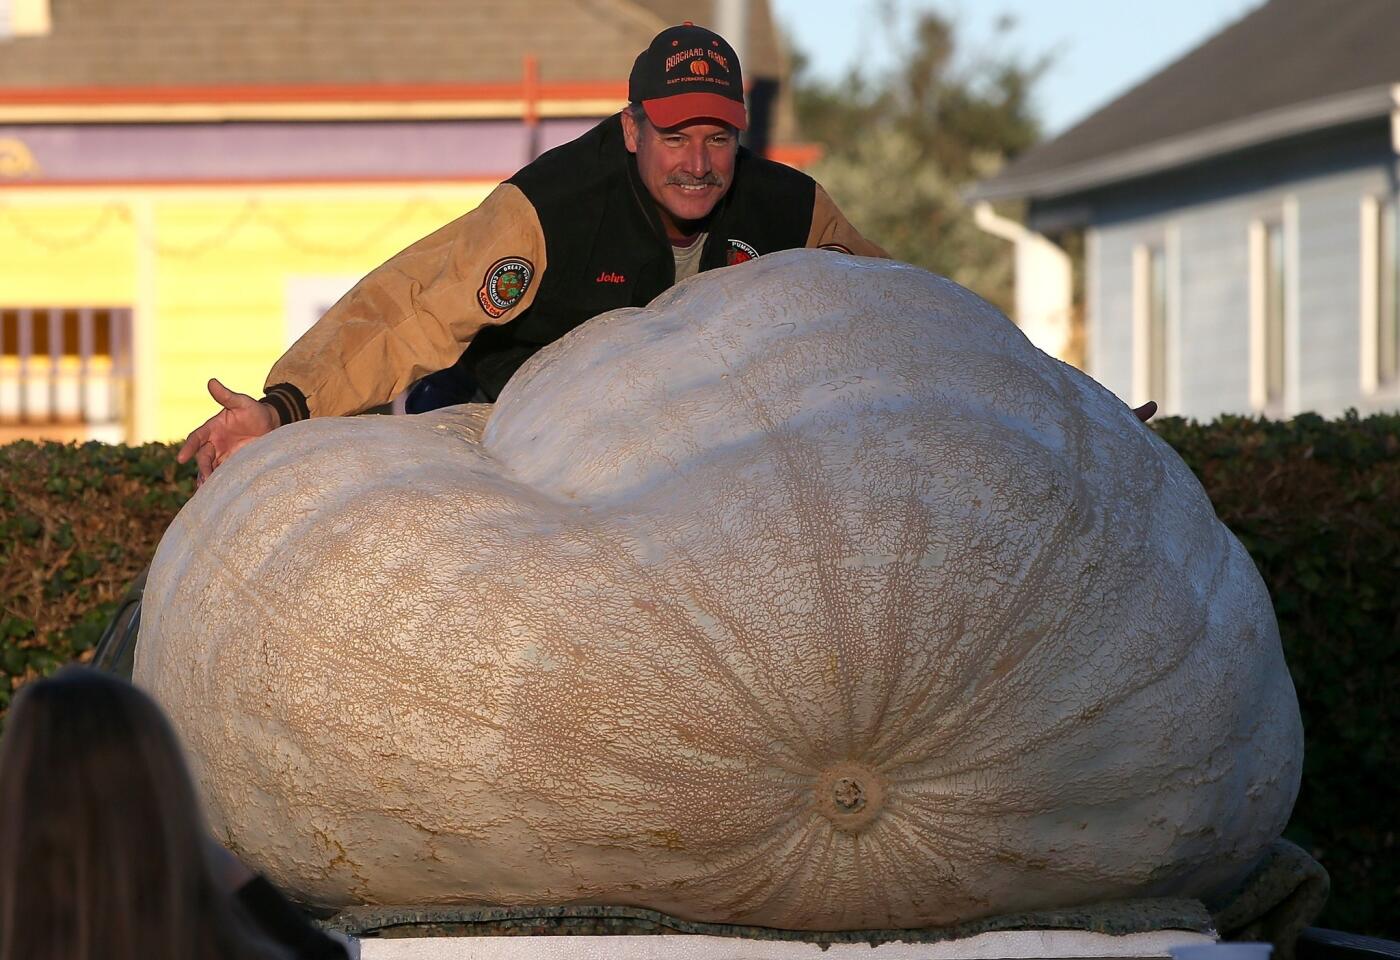 John Hawkley poses for a photo with his winning pumpkin, the world's heaviest.